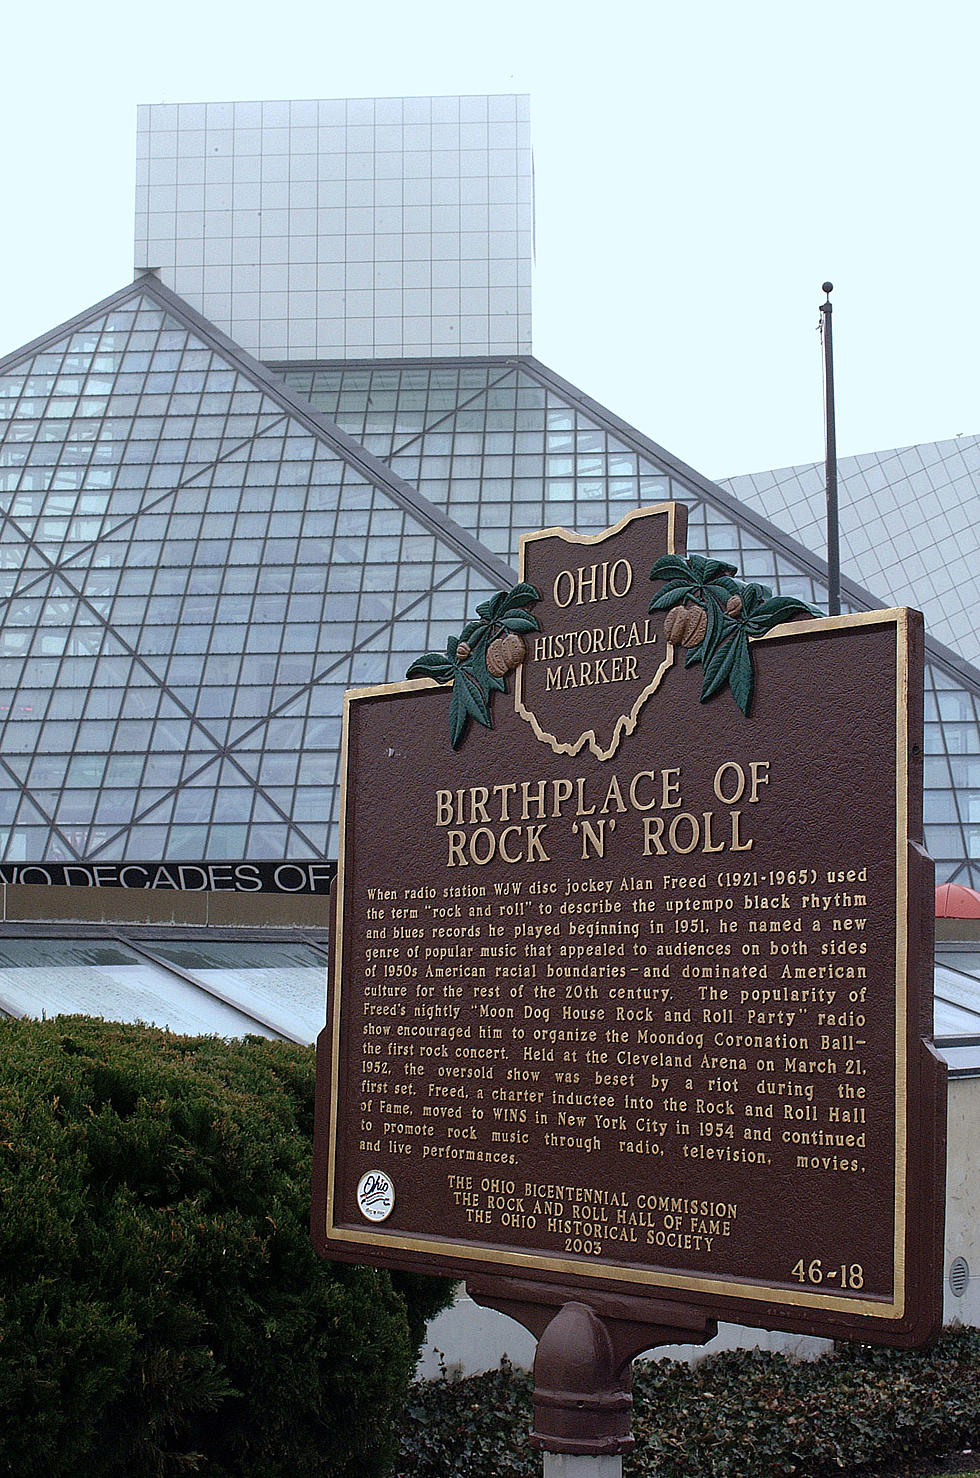 Who Are the Rock N Roll Hall of Fame Nominees This Year?